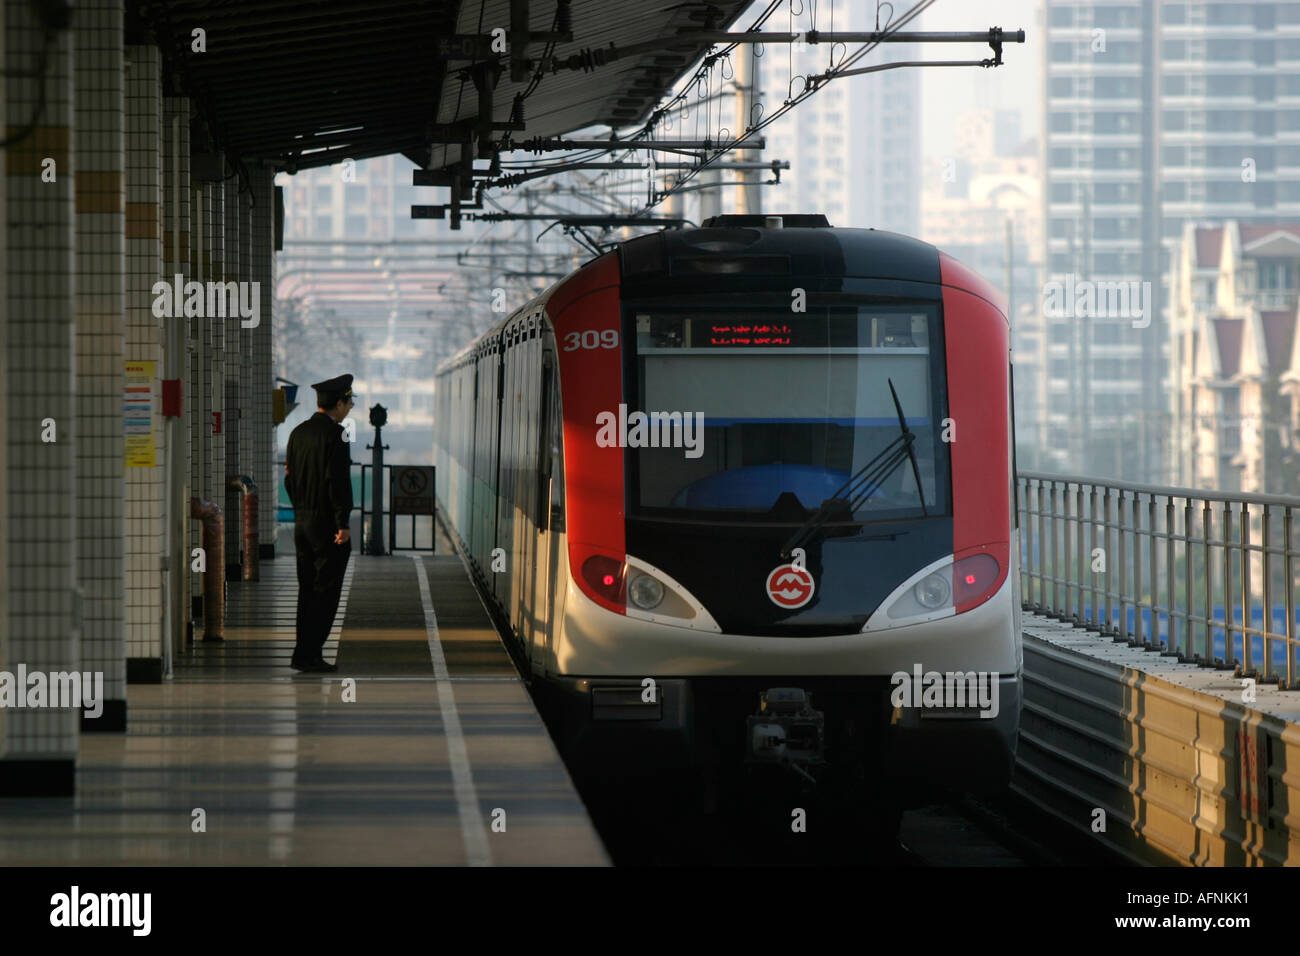 Shanghai, China. A train from Shanghai's light rail system pulls in to Cao Yang Road station. Stock Photo